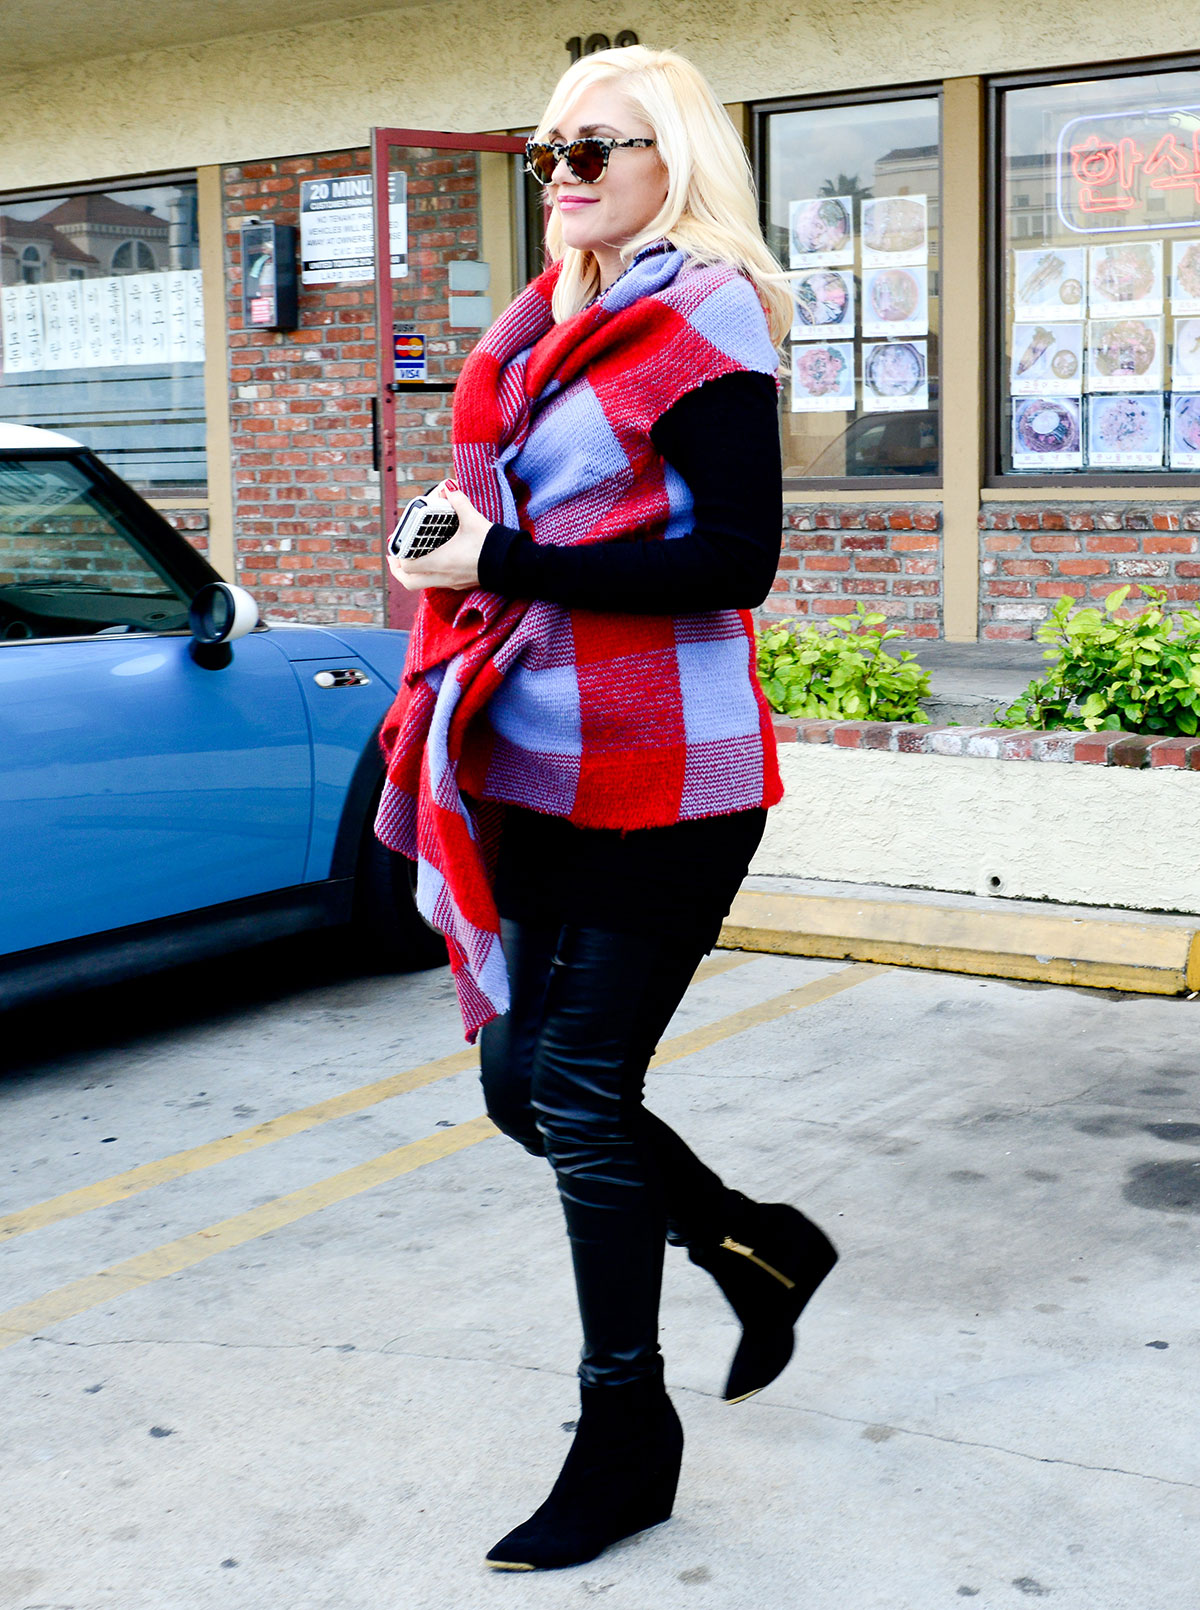 Gwen Stefani visit to her Acupuncture doctor